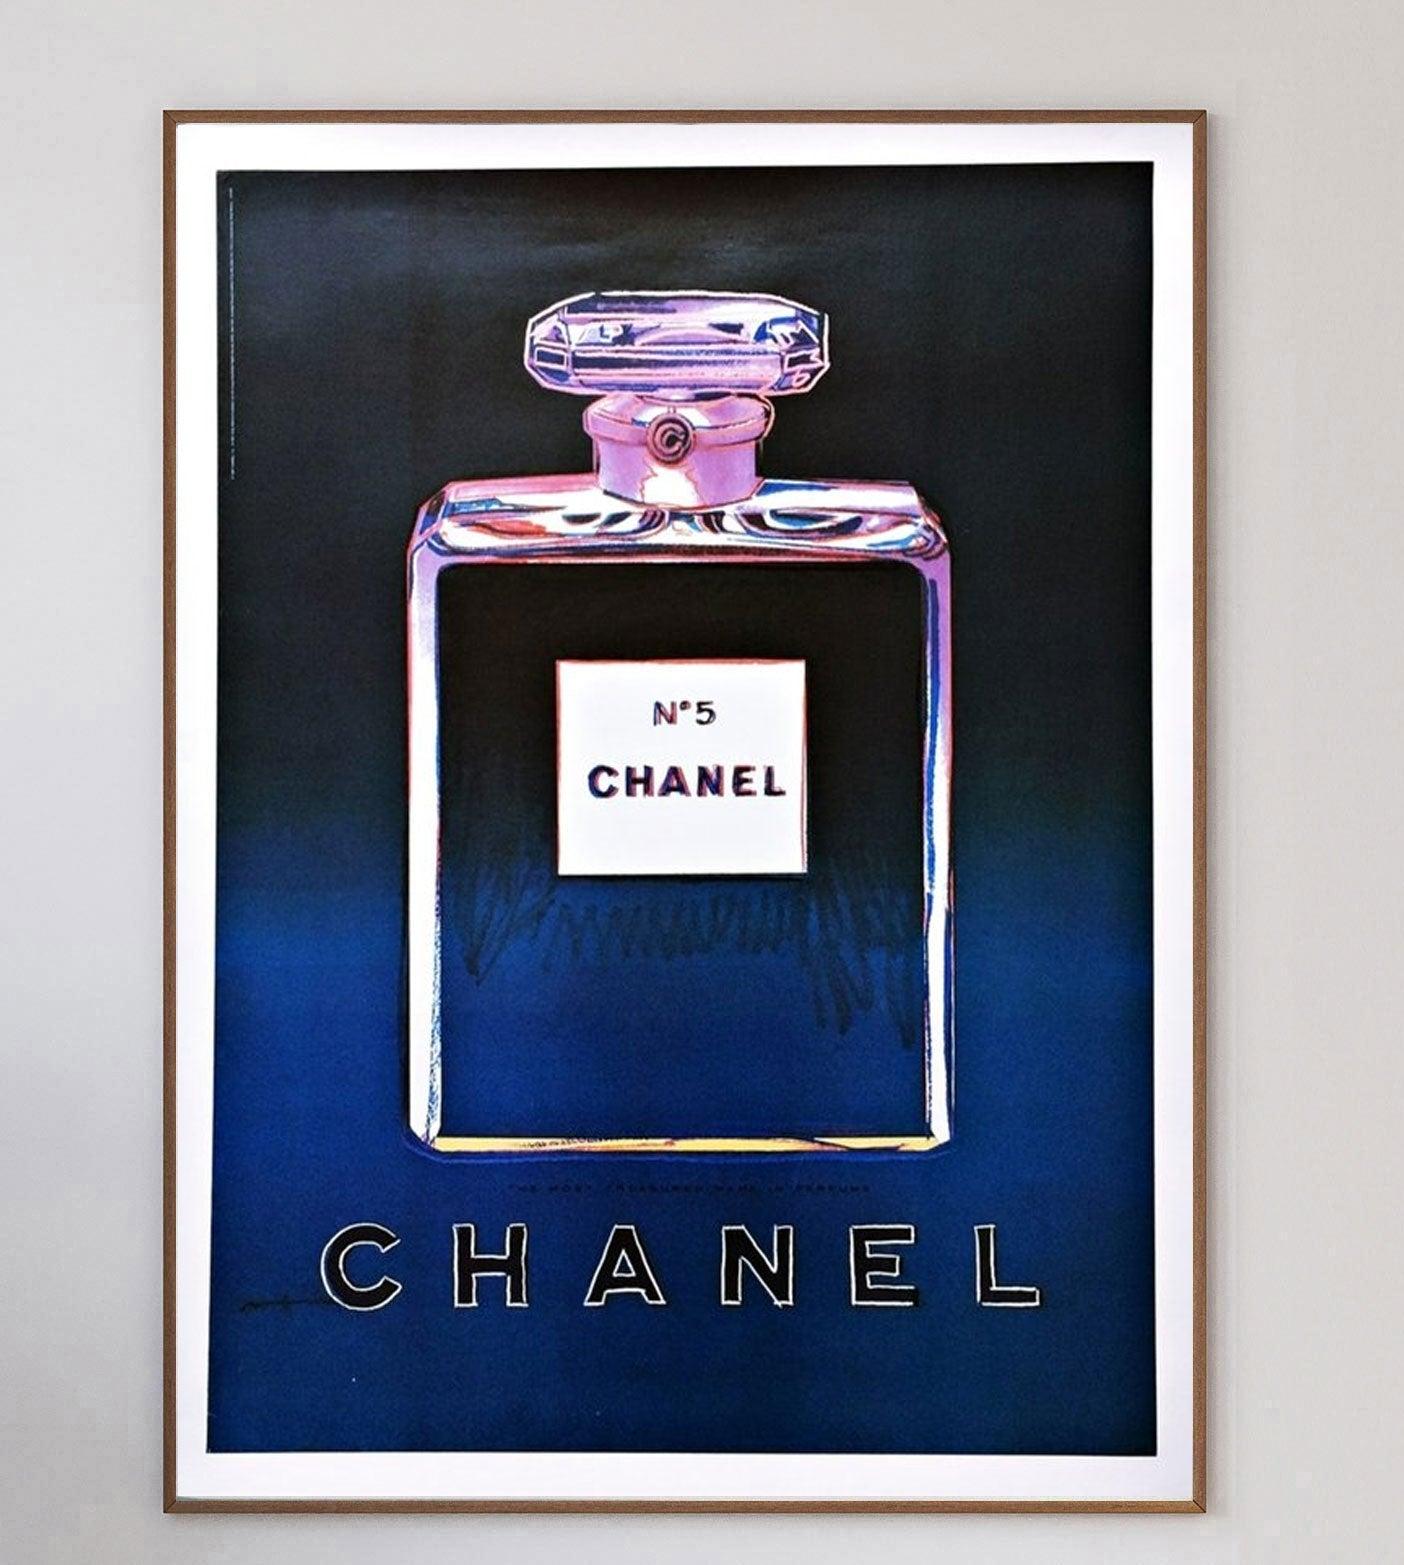 A truly iconic collaboration between Andy Warhol and Chanel no.5 began in 1985 when Warhol produced a selection of screen print artworks as part of his ADS series. The pieces were then used by Chanel as part of wider advertising campaign in 1997,